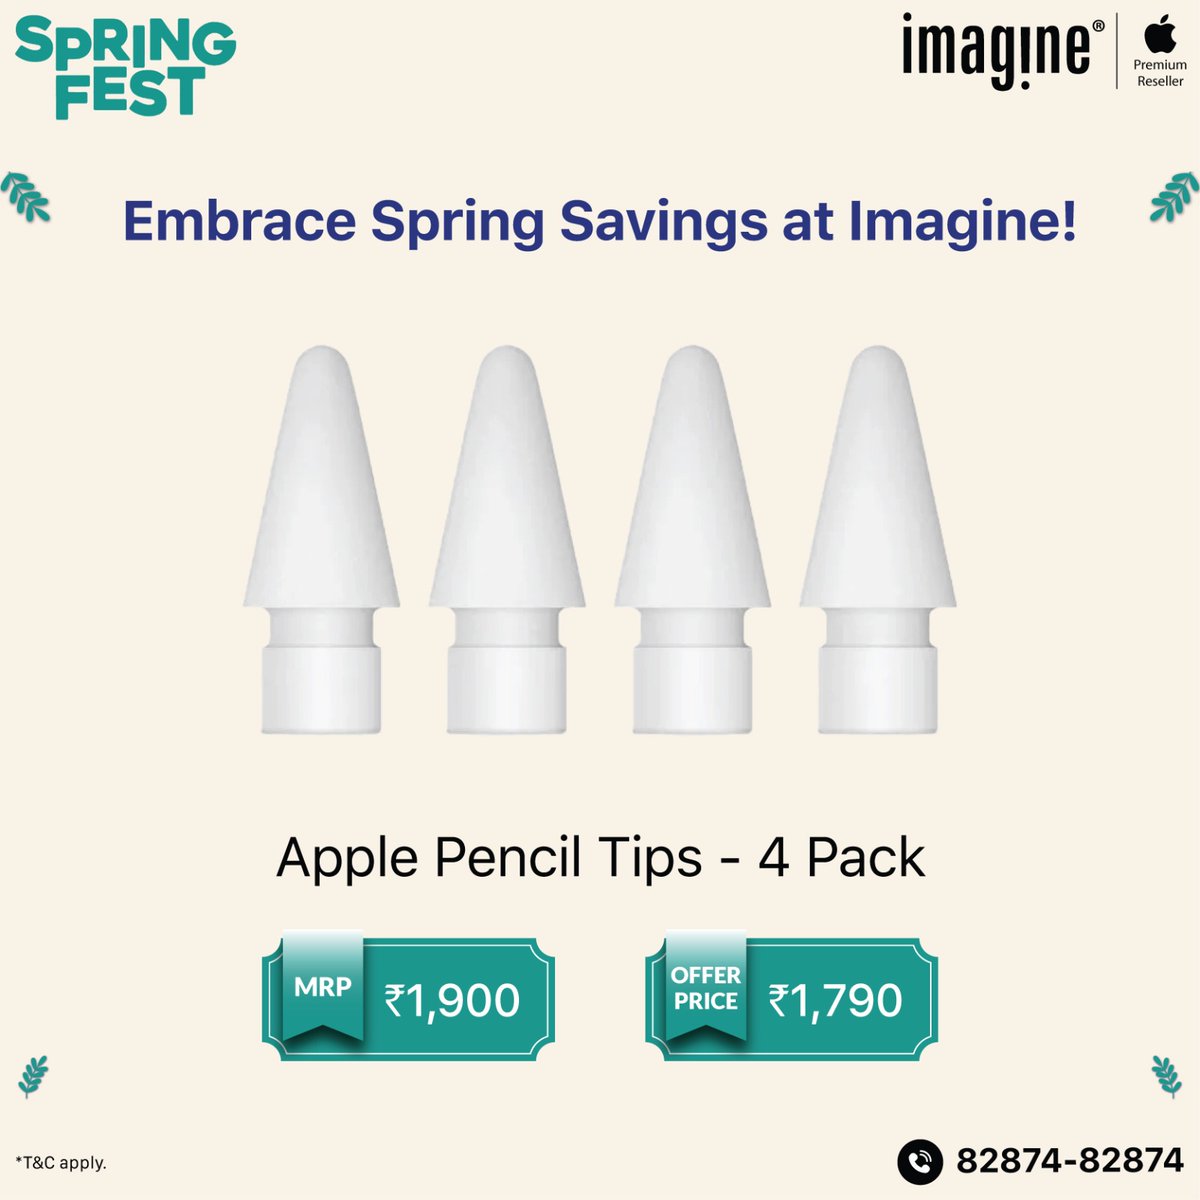 Embrace Spring Savings at Imagine! 🍃 Switch to latest iPad now at Imagine! ✅ Upto ₹3,000* Instant Cashback on ICICI Bank Debit and Credit cards and SBI Credit cards. ✅ Upto ₹4,000* Instant In-store discount ✅ Get speaker worth ₹10,900* ✅ GST Invoice available ✅ Upto 24